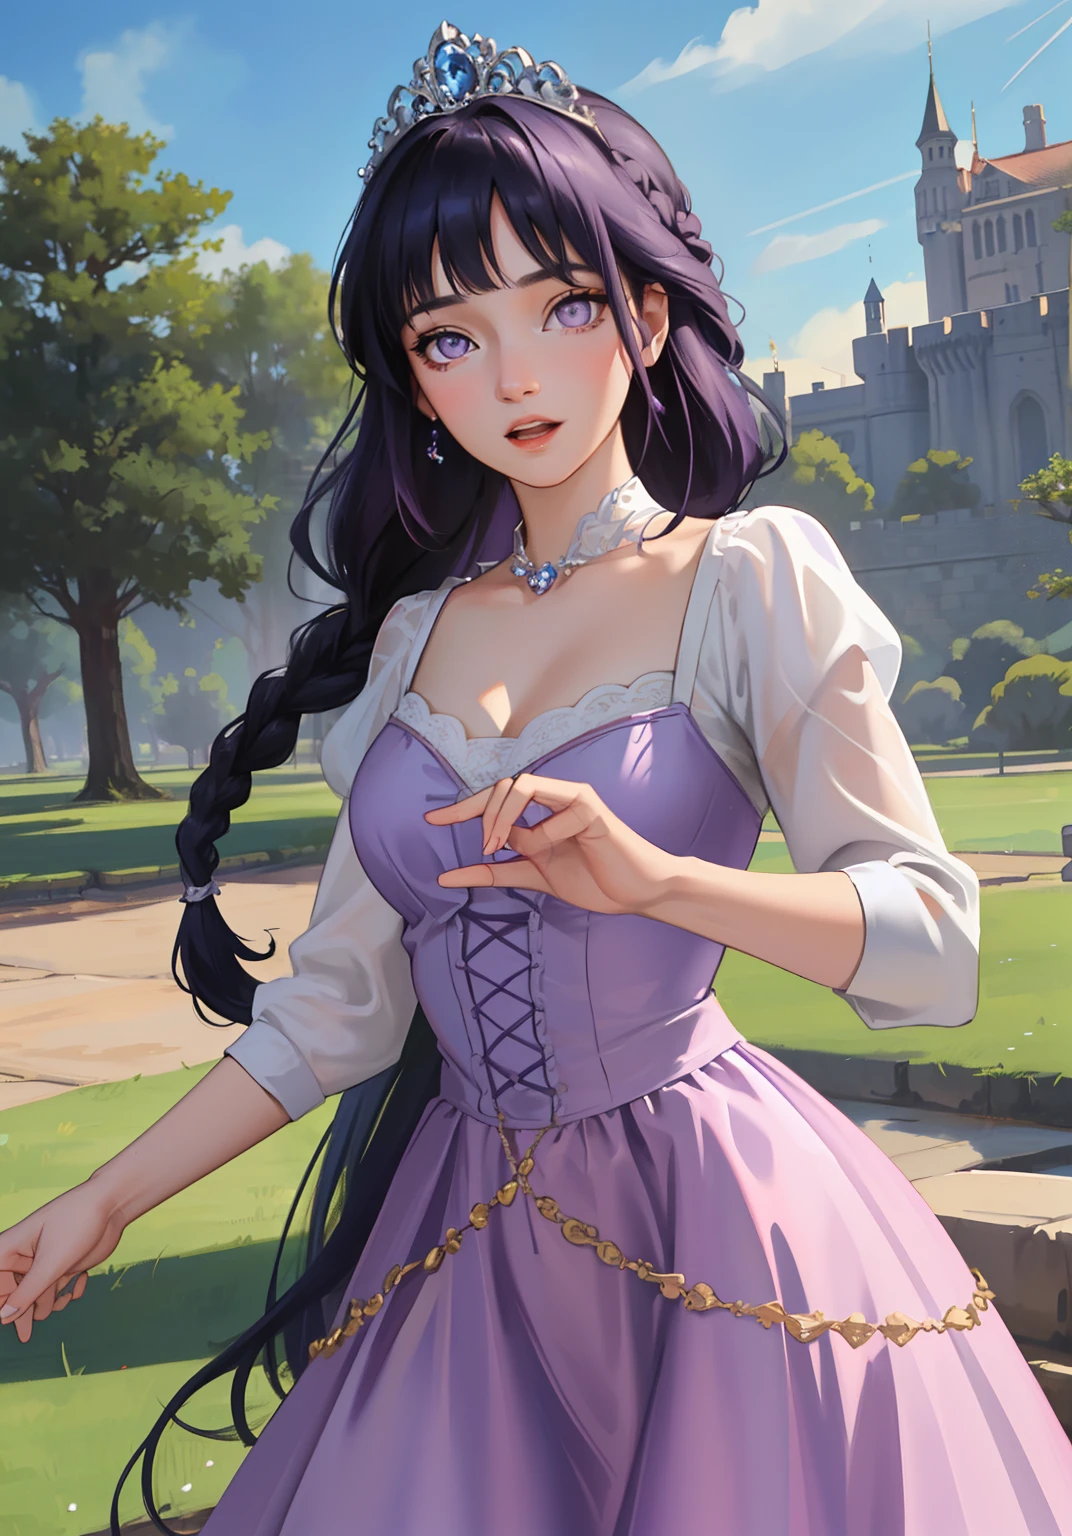 (RapunzelWaifu:1), surprised, beautiful pose, looking at the viewer, thick thighs, (long soft purple dress:1.2), (very long hair, tiara) :D,braid,

(realistic: 1.2), (realism), (masterpiece: 1.2), (best quality), (ultra detailed), (8k, 4k, intricate), (full-body-shot: 1), (Cowboy-shot: 1.2), (85mm), light particles, lighting, (highly detailed: 1.2), (detailed face: 1.2), (gradients), sfw, colorful, (detailed eyes: 1.2),

(detailed landscape, garden, plants, castle: 1.2), (detailed background), detailed landscape, (dynamic angle: 1.2), (dynamic pose: 1.2), (rule of third_composition: 1.3), (line of action: 1.2), wide shot, daylight, soil, Blunt Bangs, purple eyes,dark blue hair